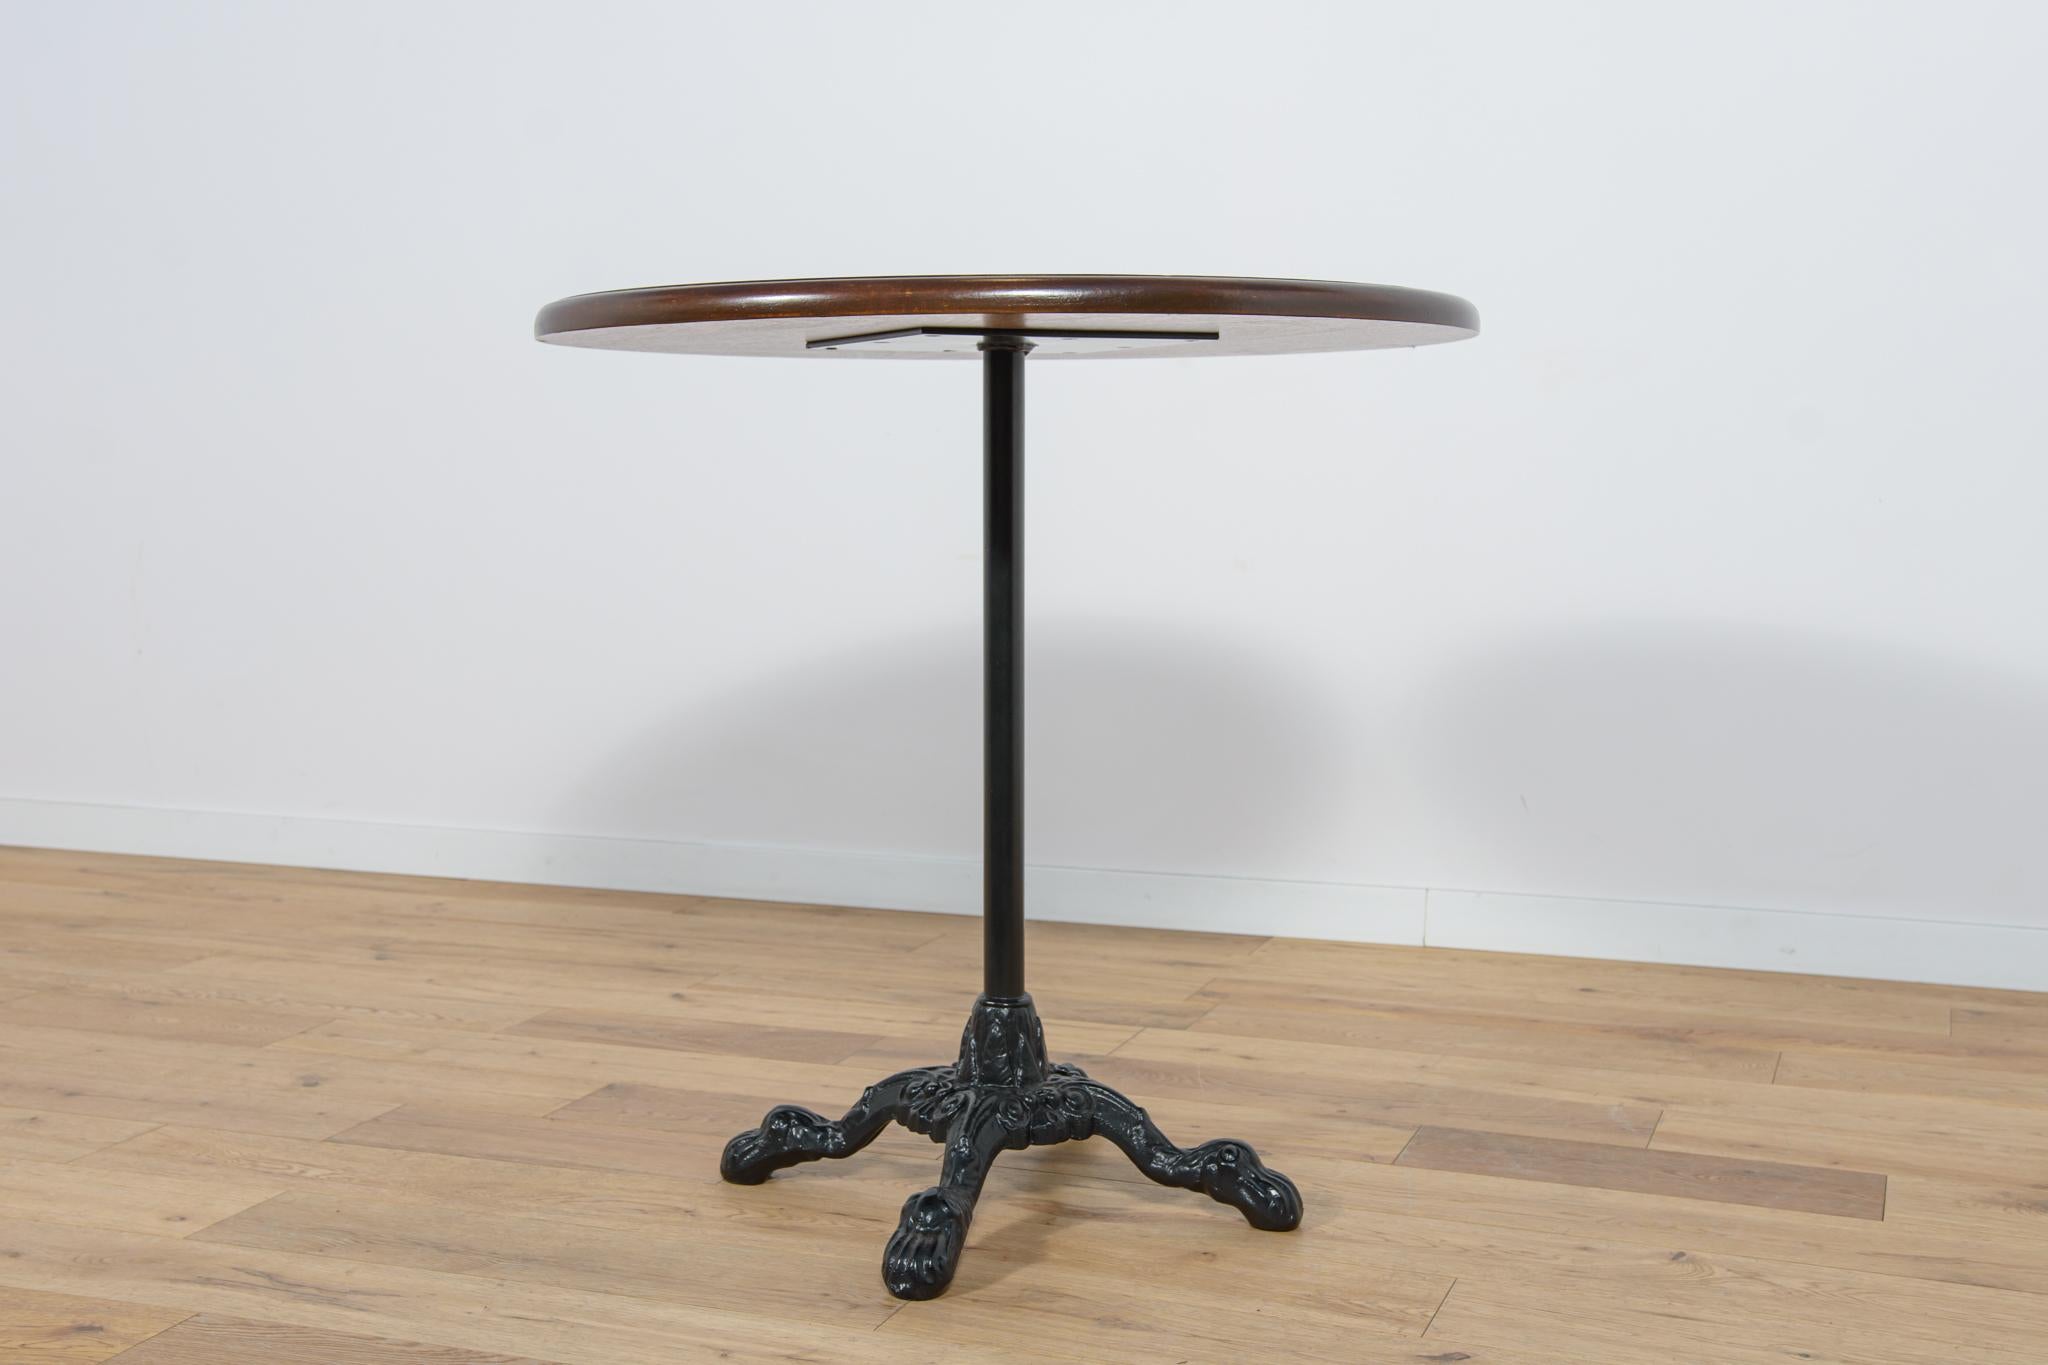 British Art Nouveu Cast Iron and Wood Coffee Table, 1920s For Sale